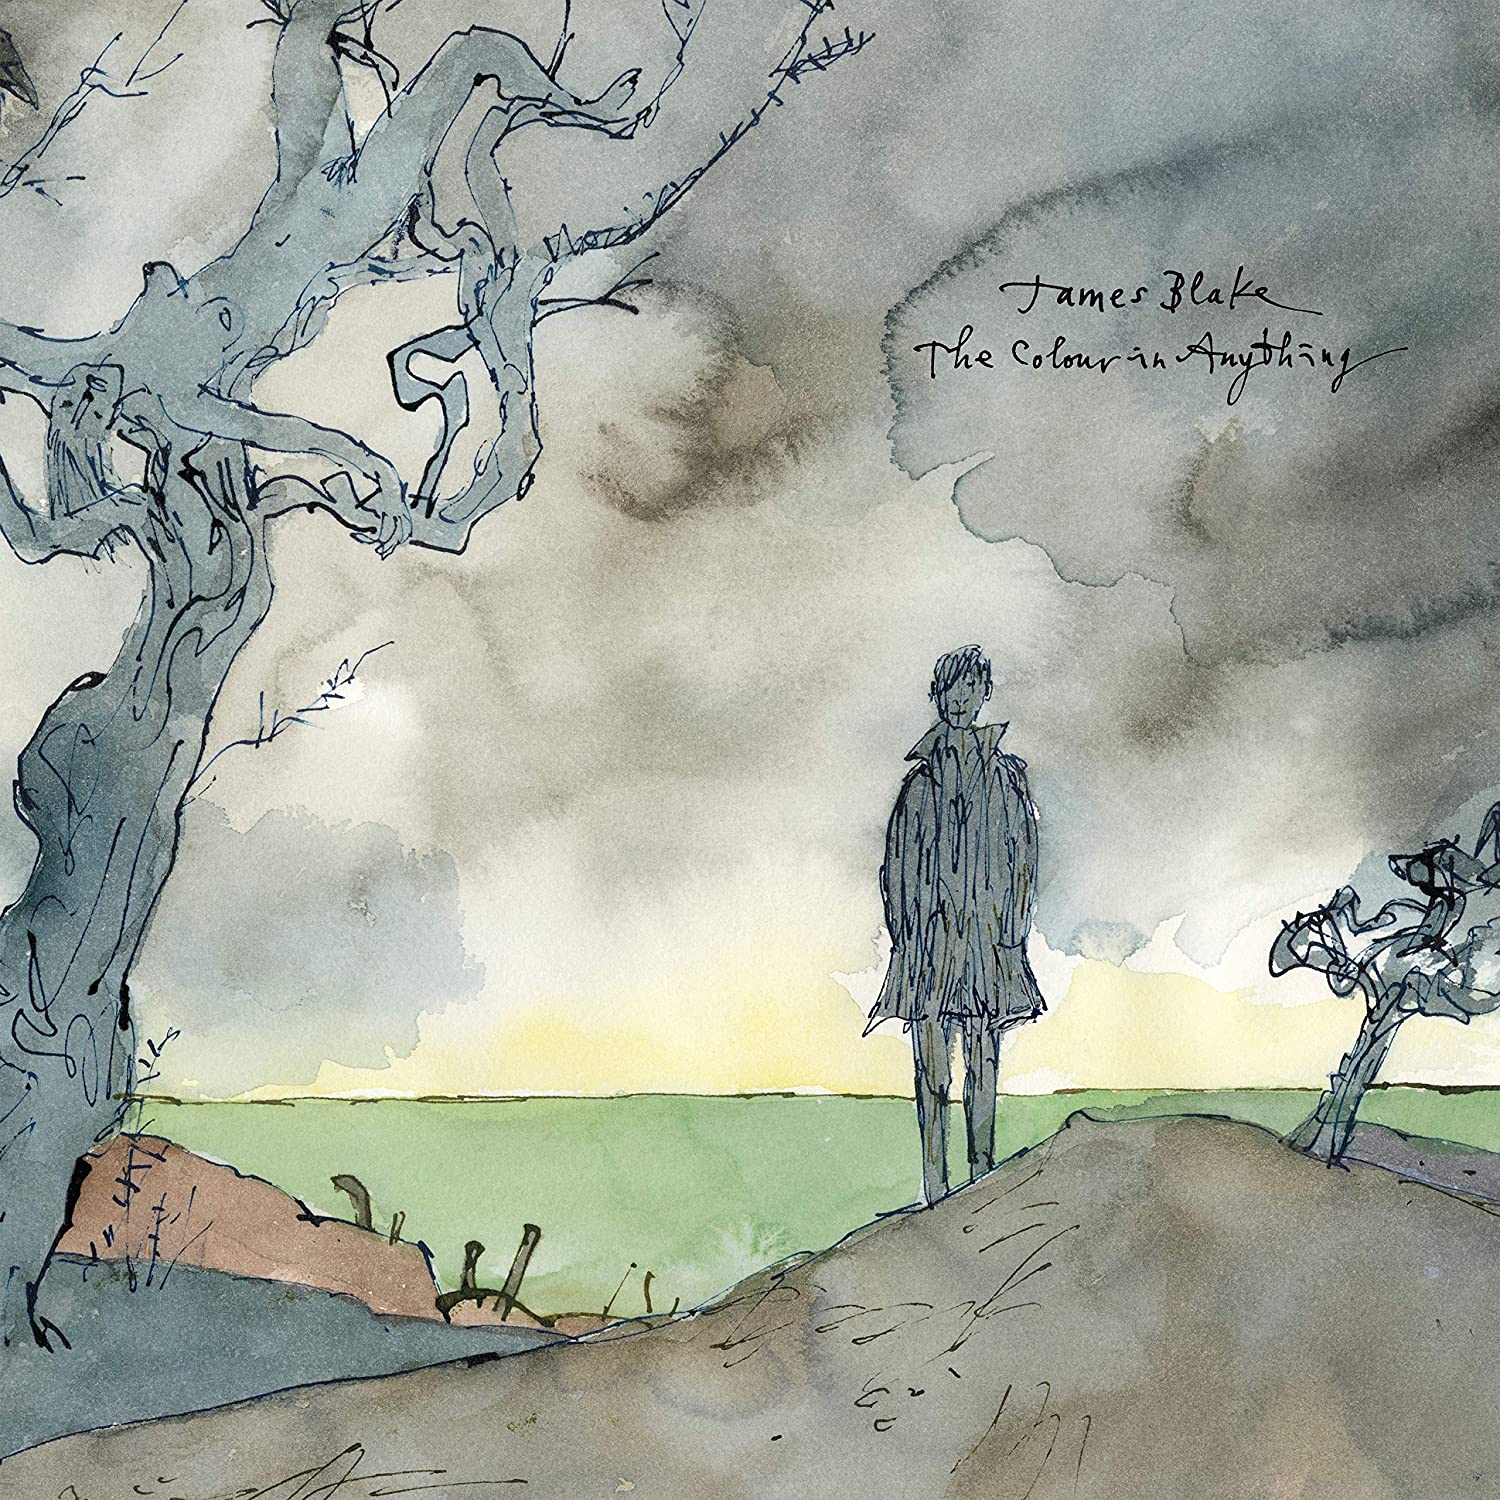 James Blake "The Colour in Anything" 2LP